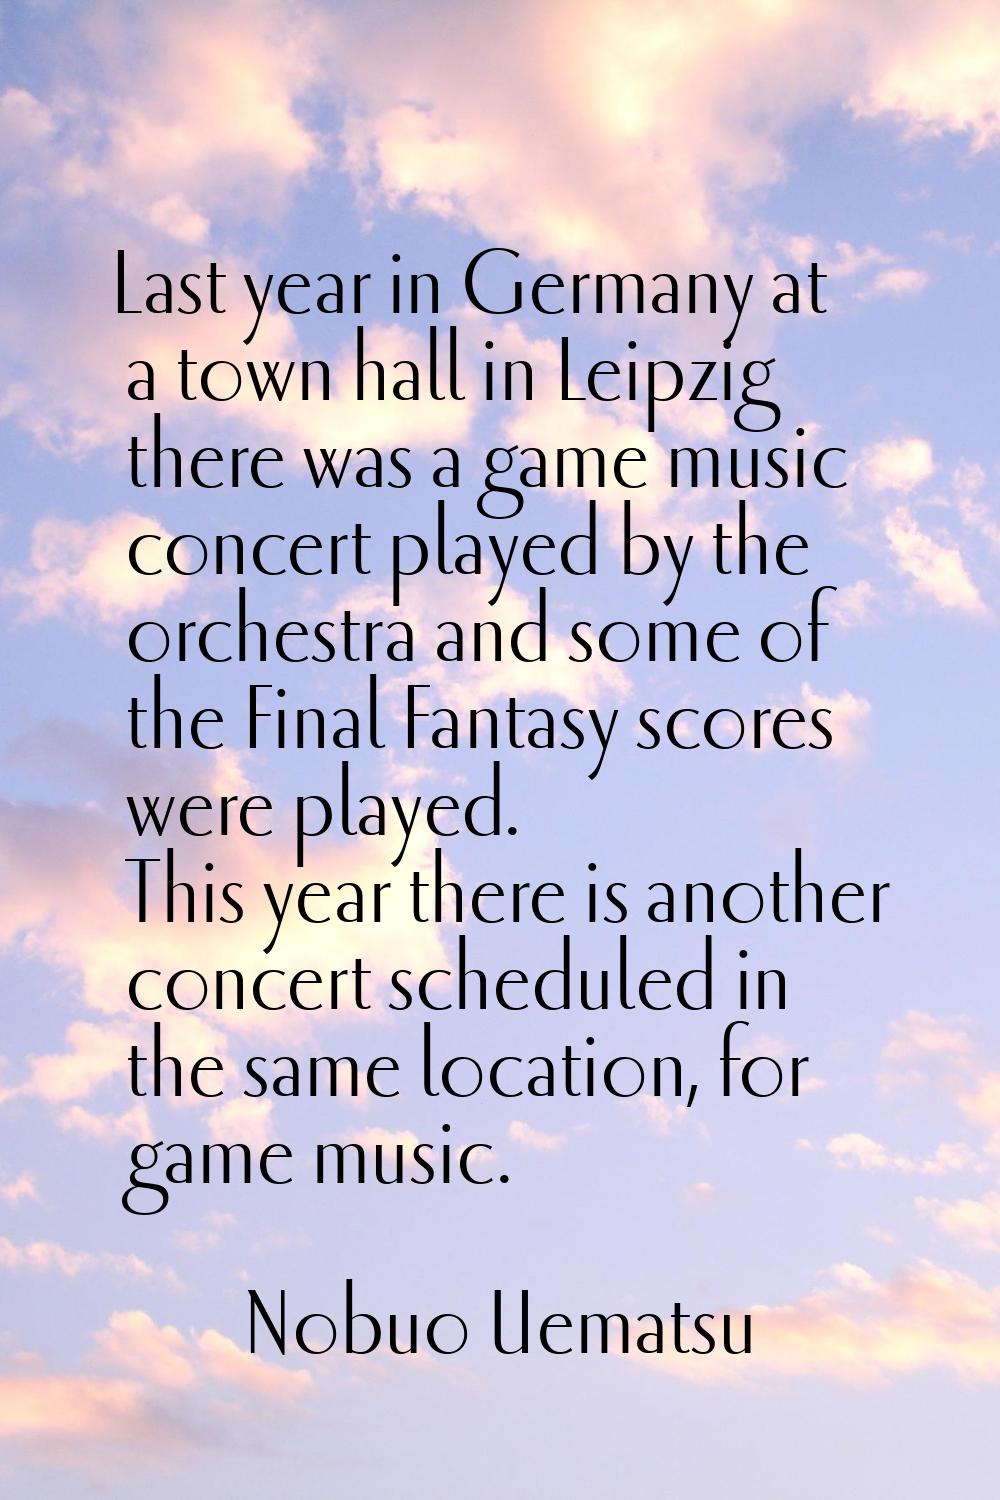 Last year in Germany at a town hall in Leipzig there was a game music concert played by the orchest